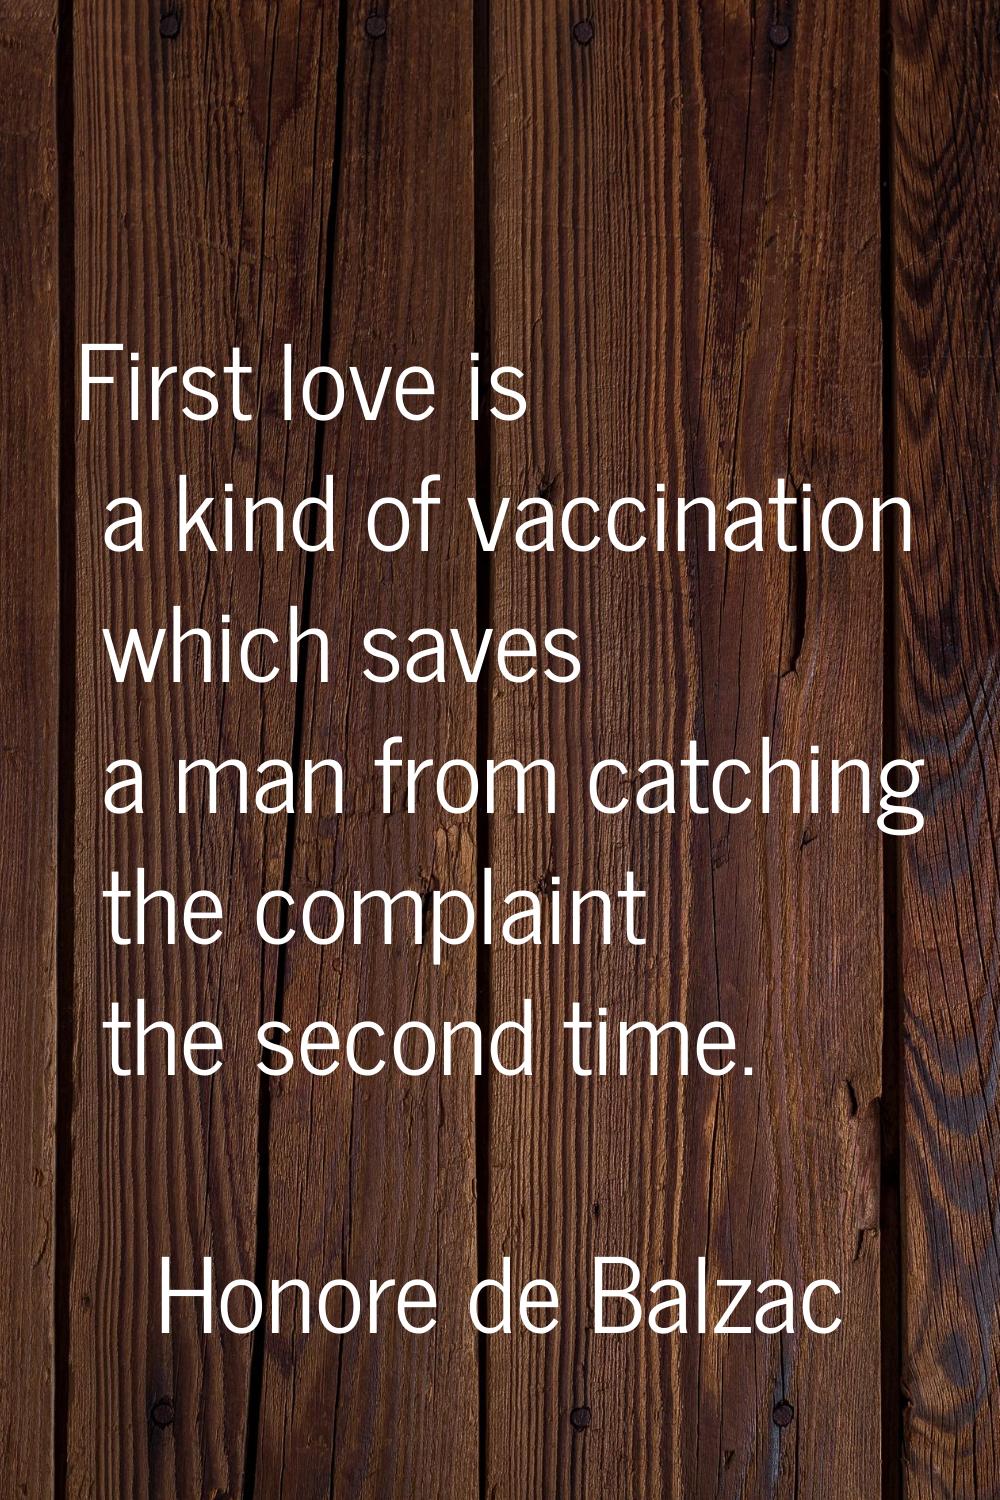 First love is a kind of vaccination which saves a man from catching the complaint the second time.